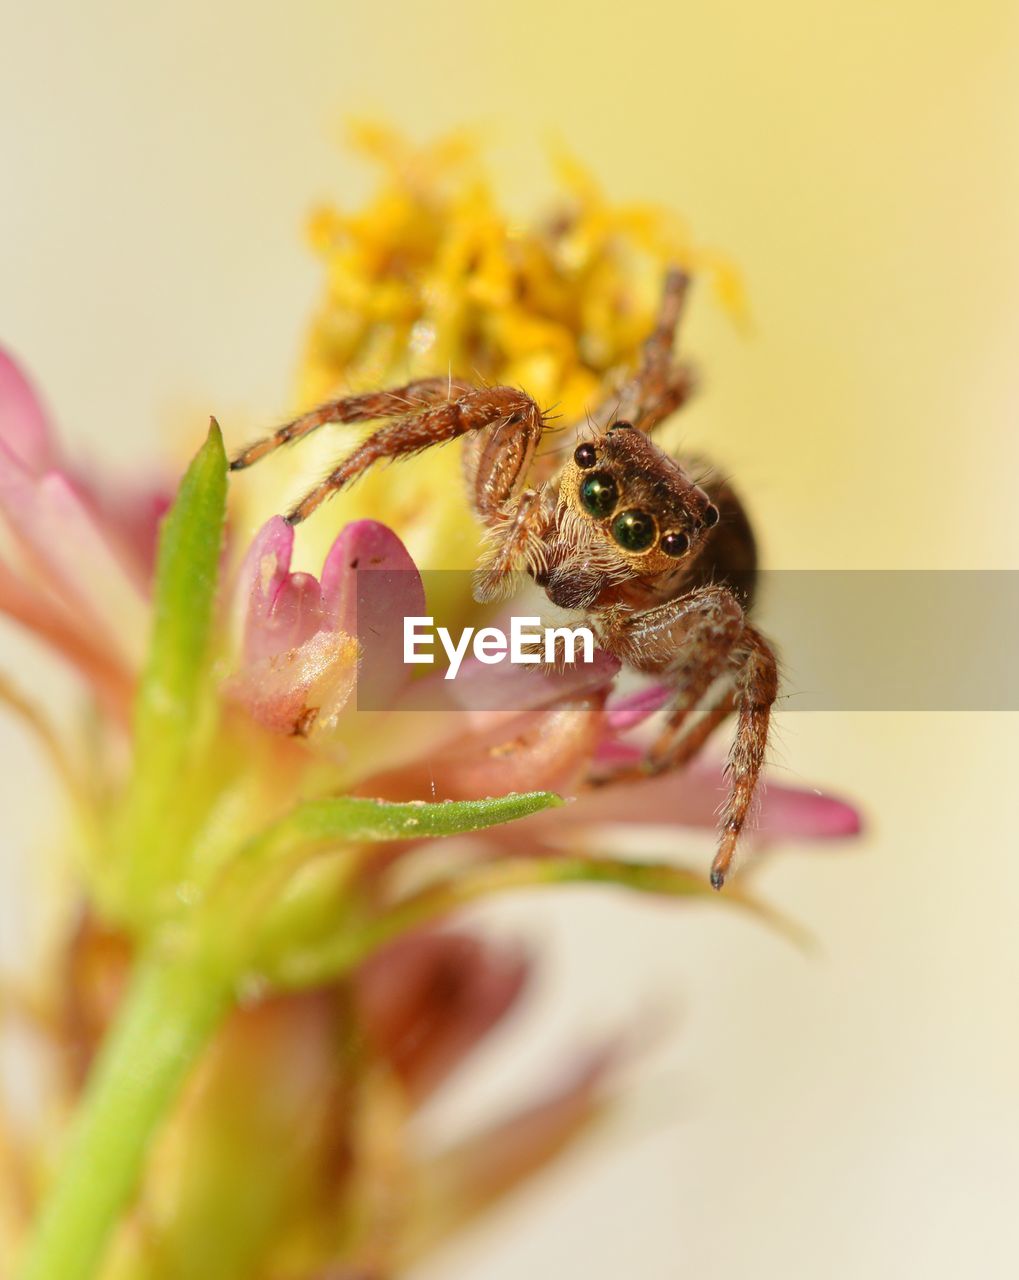 CLOSE-UP OF SPIDER ON FLOWER OUTDOORS